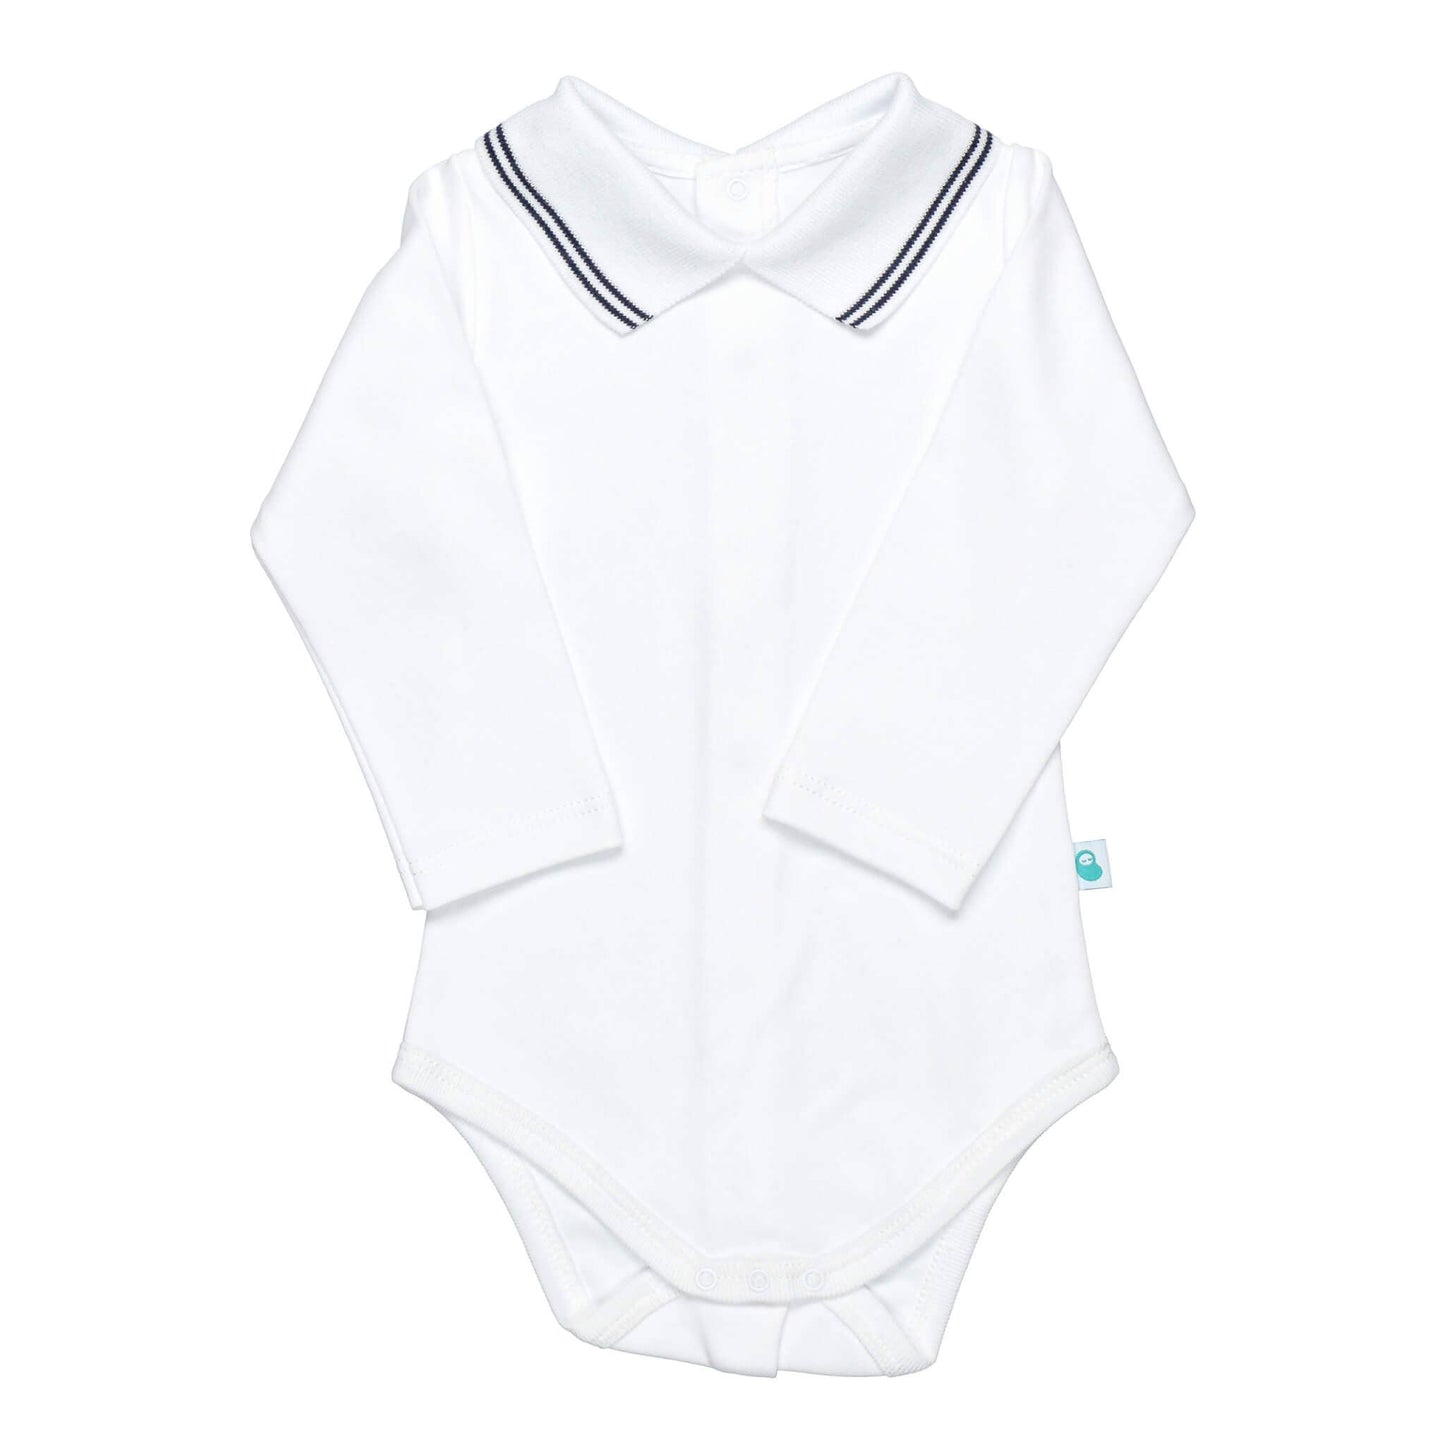 Cotton Baby Bodysuit Onesie with Polo-Style Collar: 0-1M / Short Sleeve / Light Blue